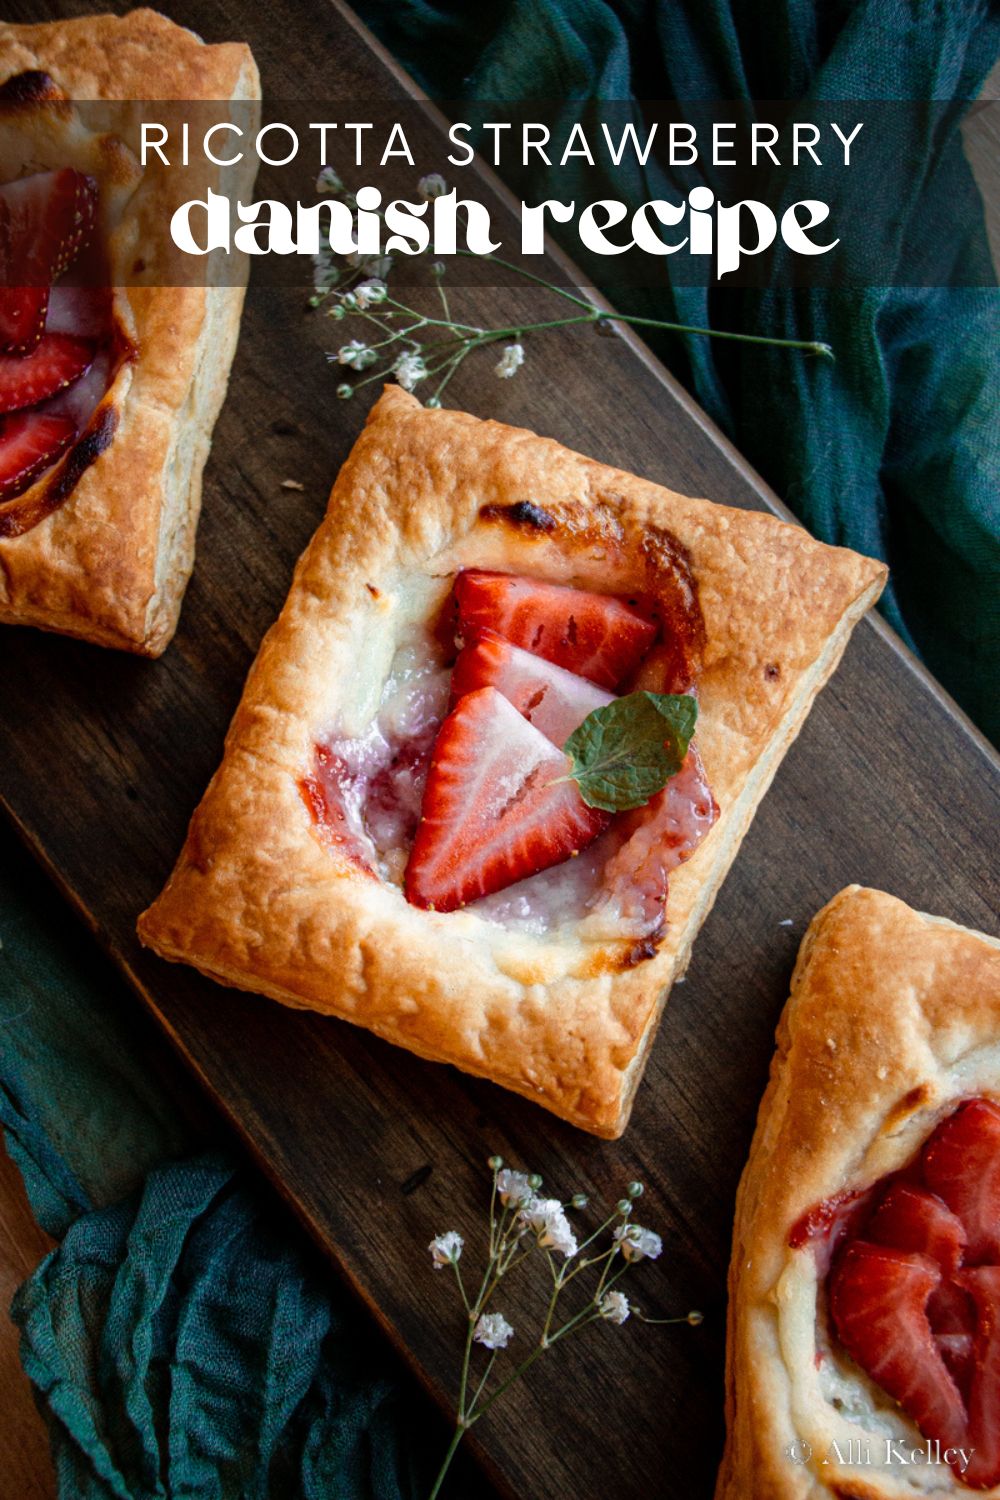 For a delicious breakfast or fruity afternoon treat, this strawberry danish is a perfect choice. With its sweet and creamy filling, flaky crust, and topped with fresh strawberries, my strawberry cheese danish is sure to satisfy your taste buds! Not to mention it is quick and easy, which is ideal for busy mornings.